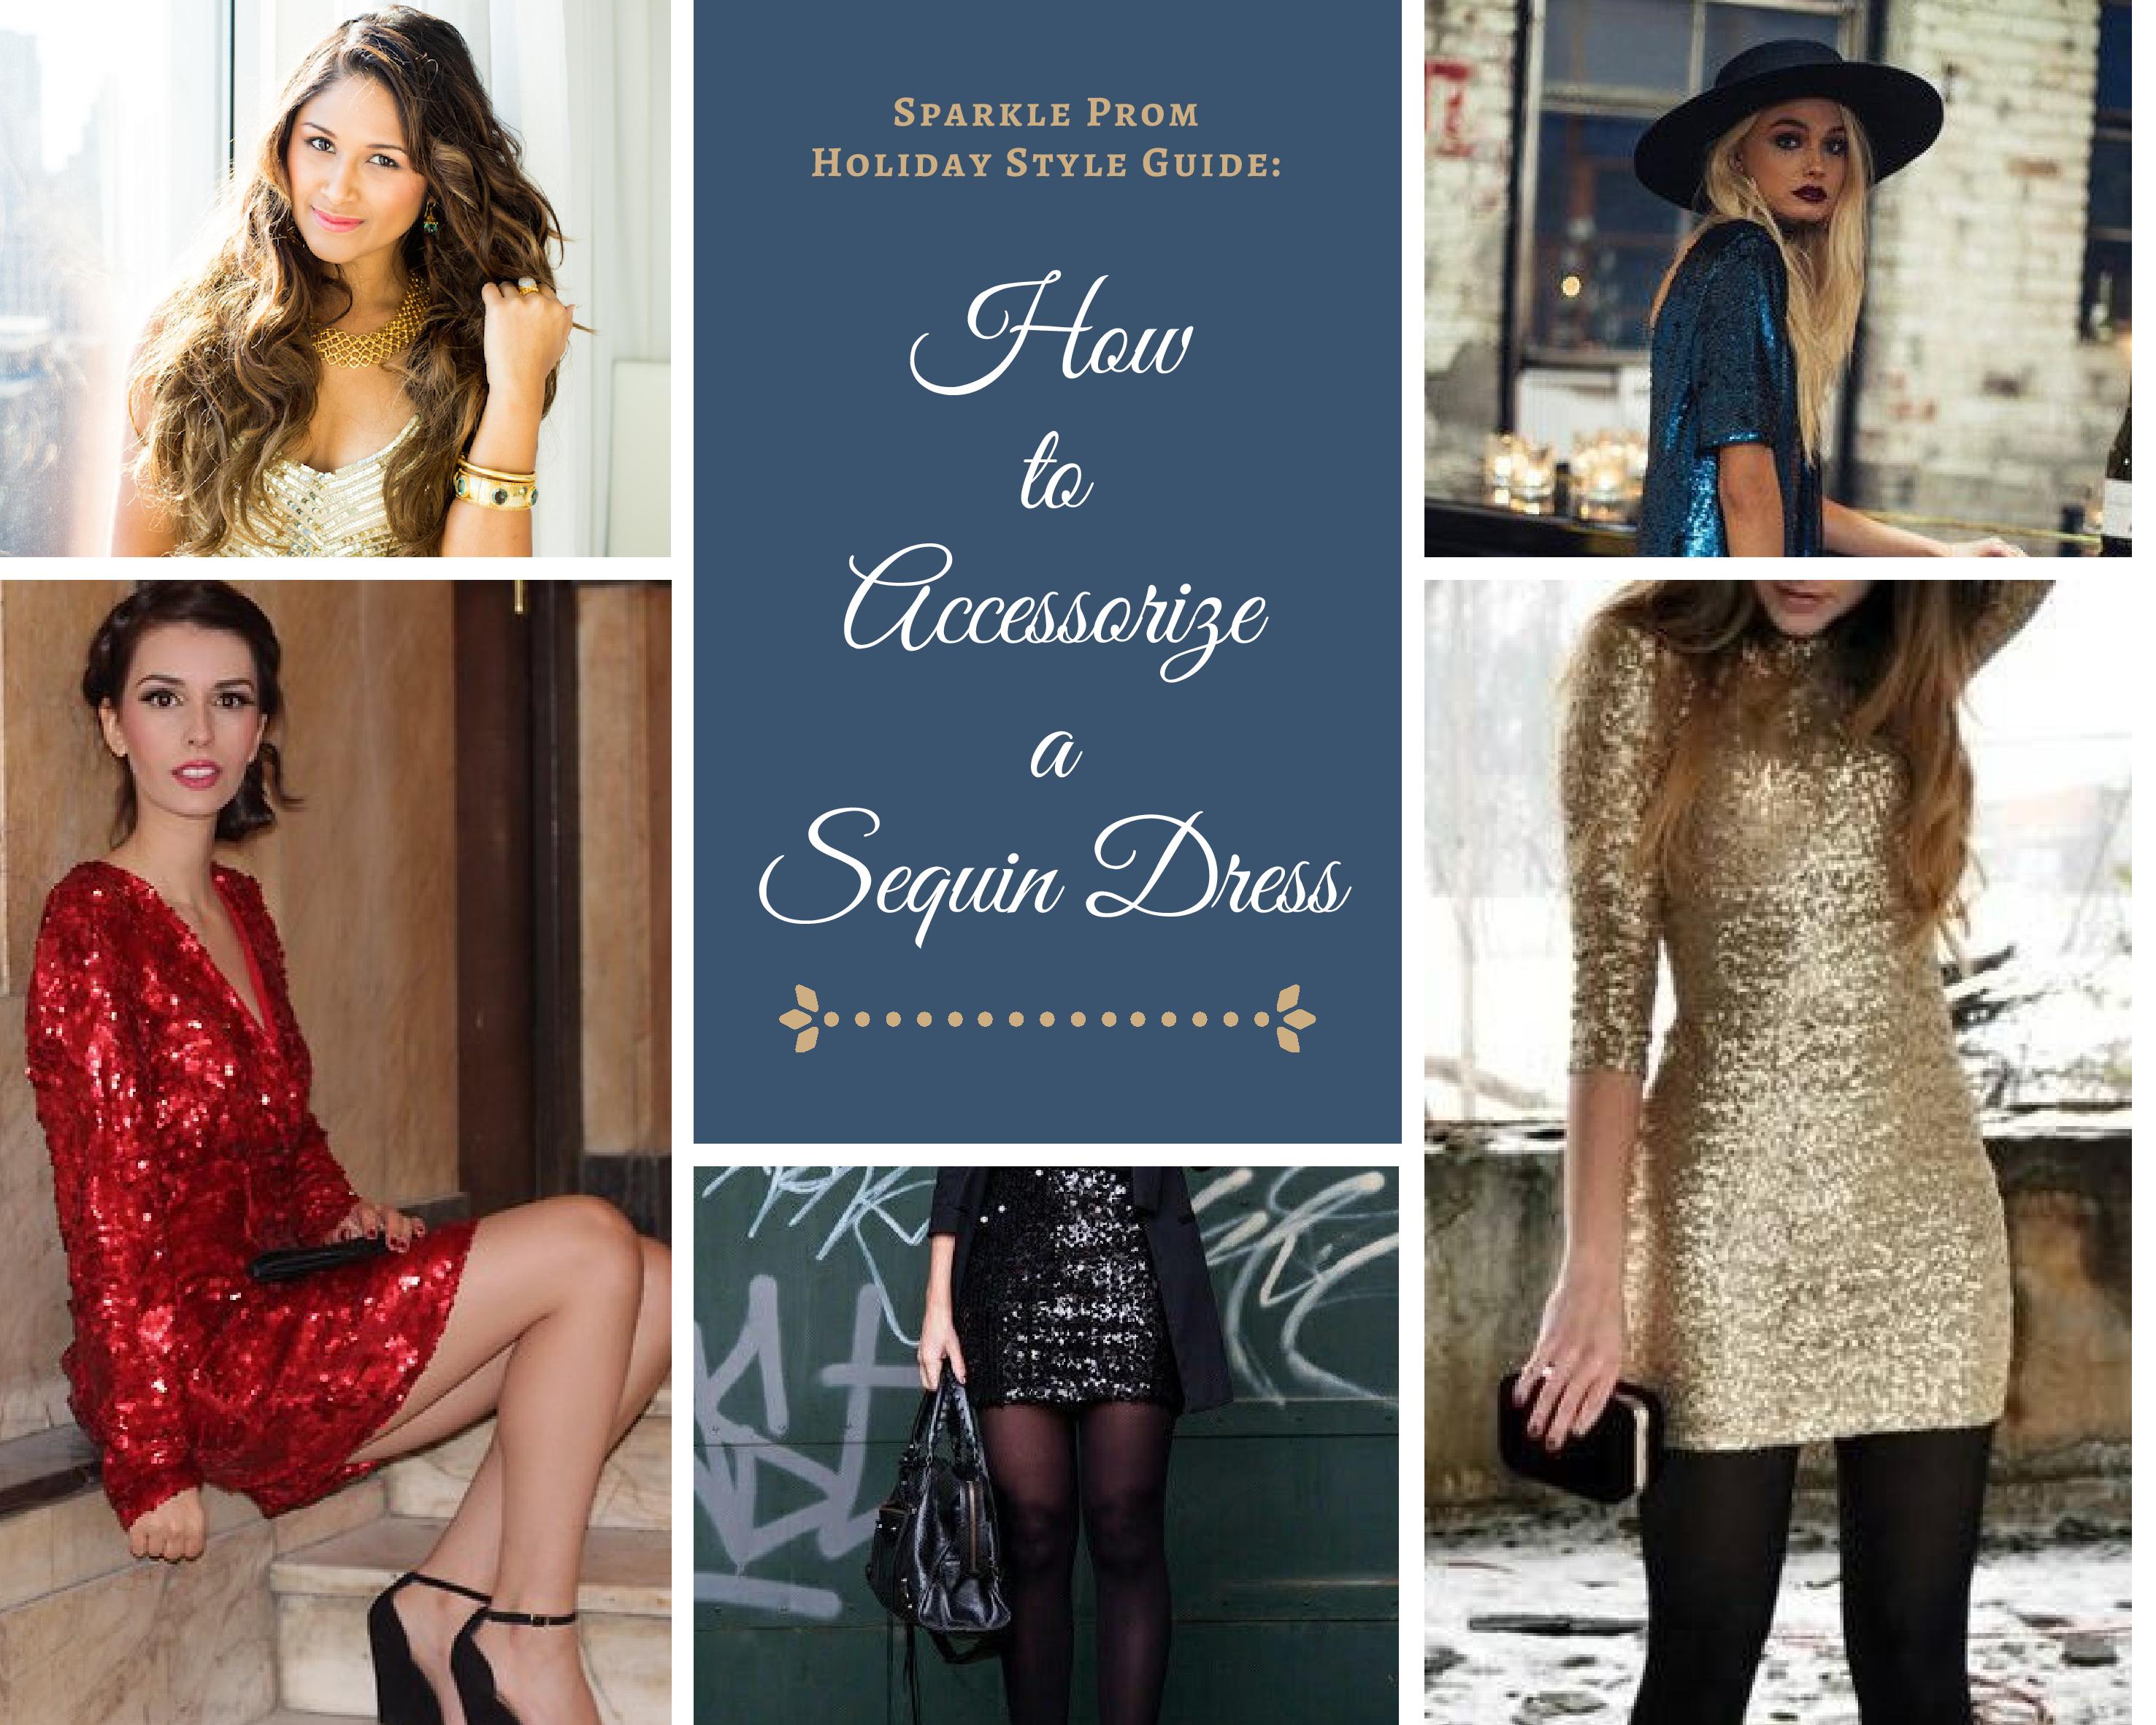 How to Accessorize a Sequin Dress - Sparkle Prom